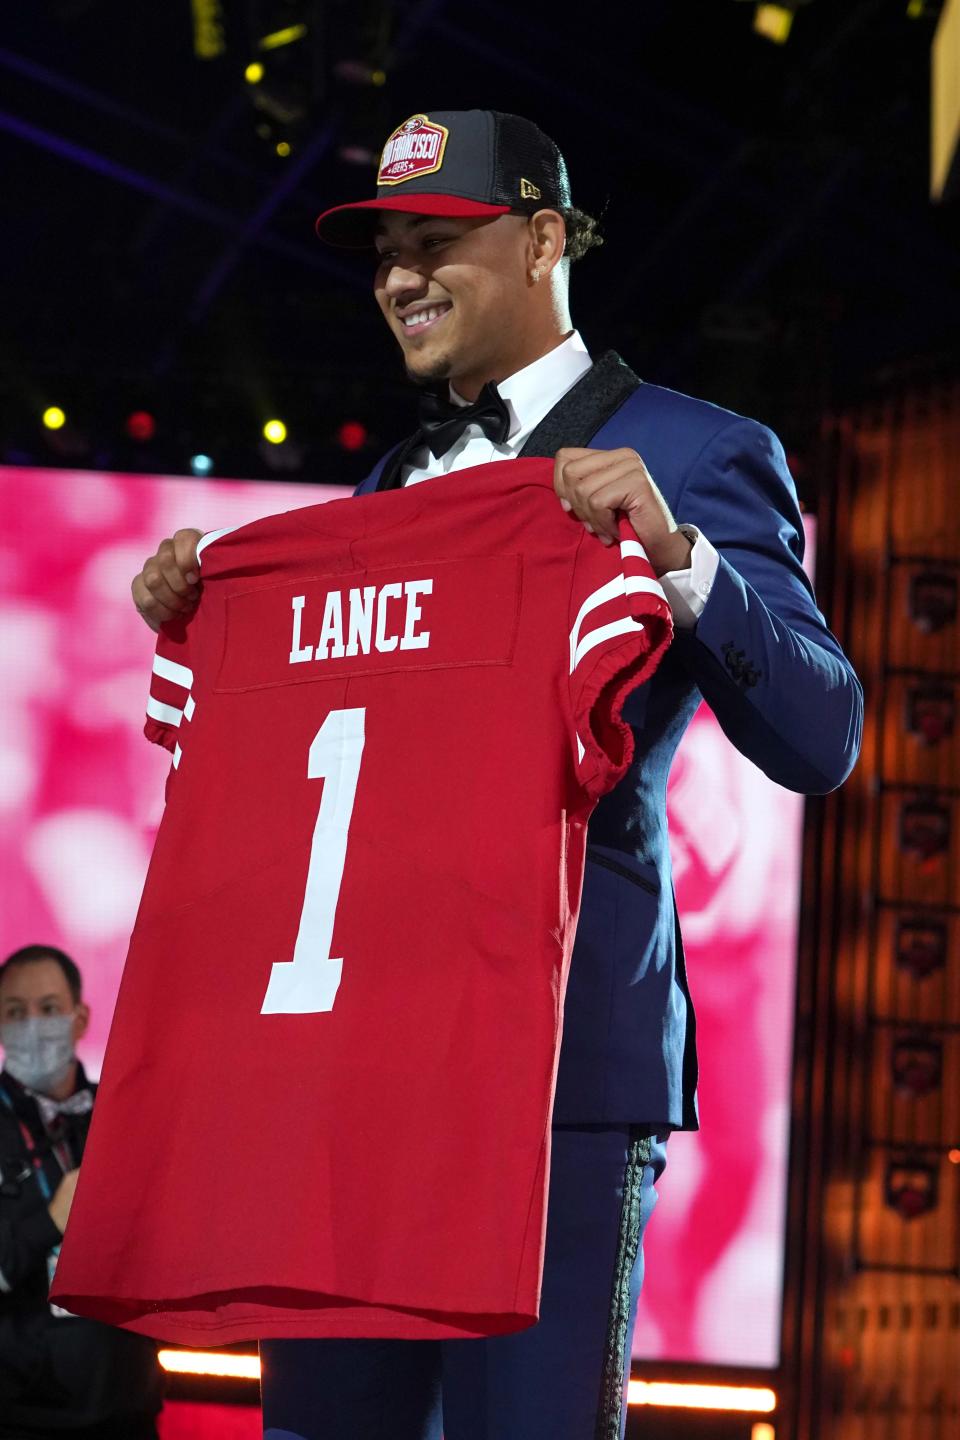 Trey Lance poses with a jersey after being selected as the third pick by the San Francisco 49ers.